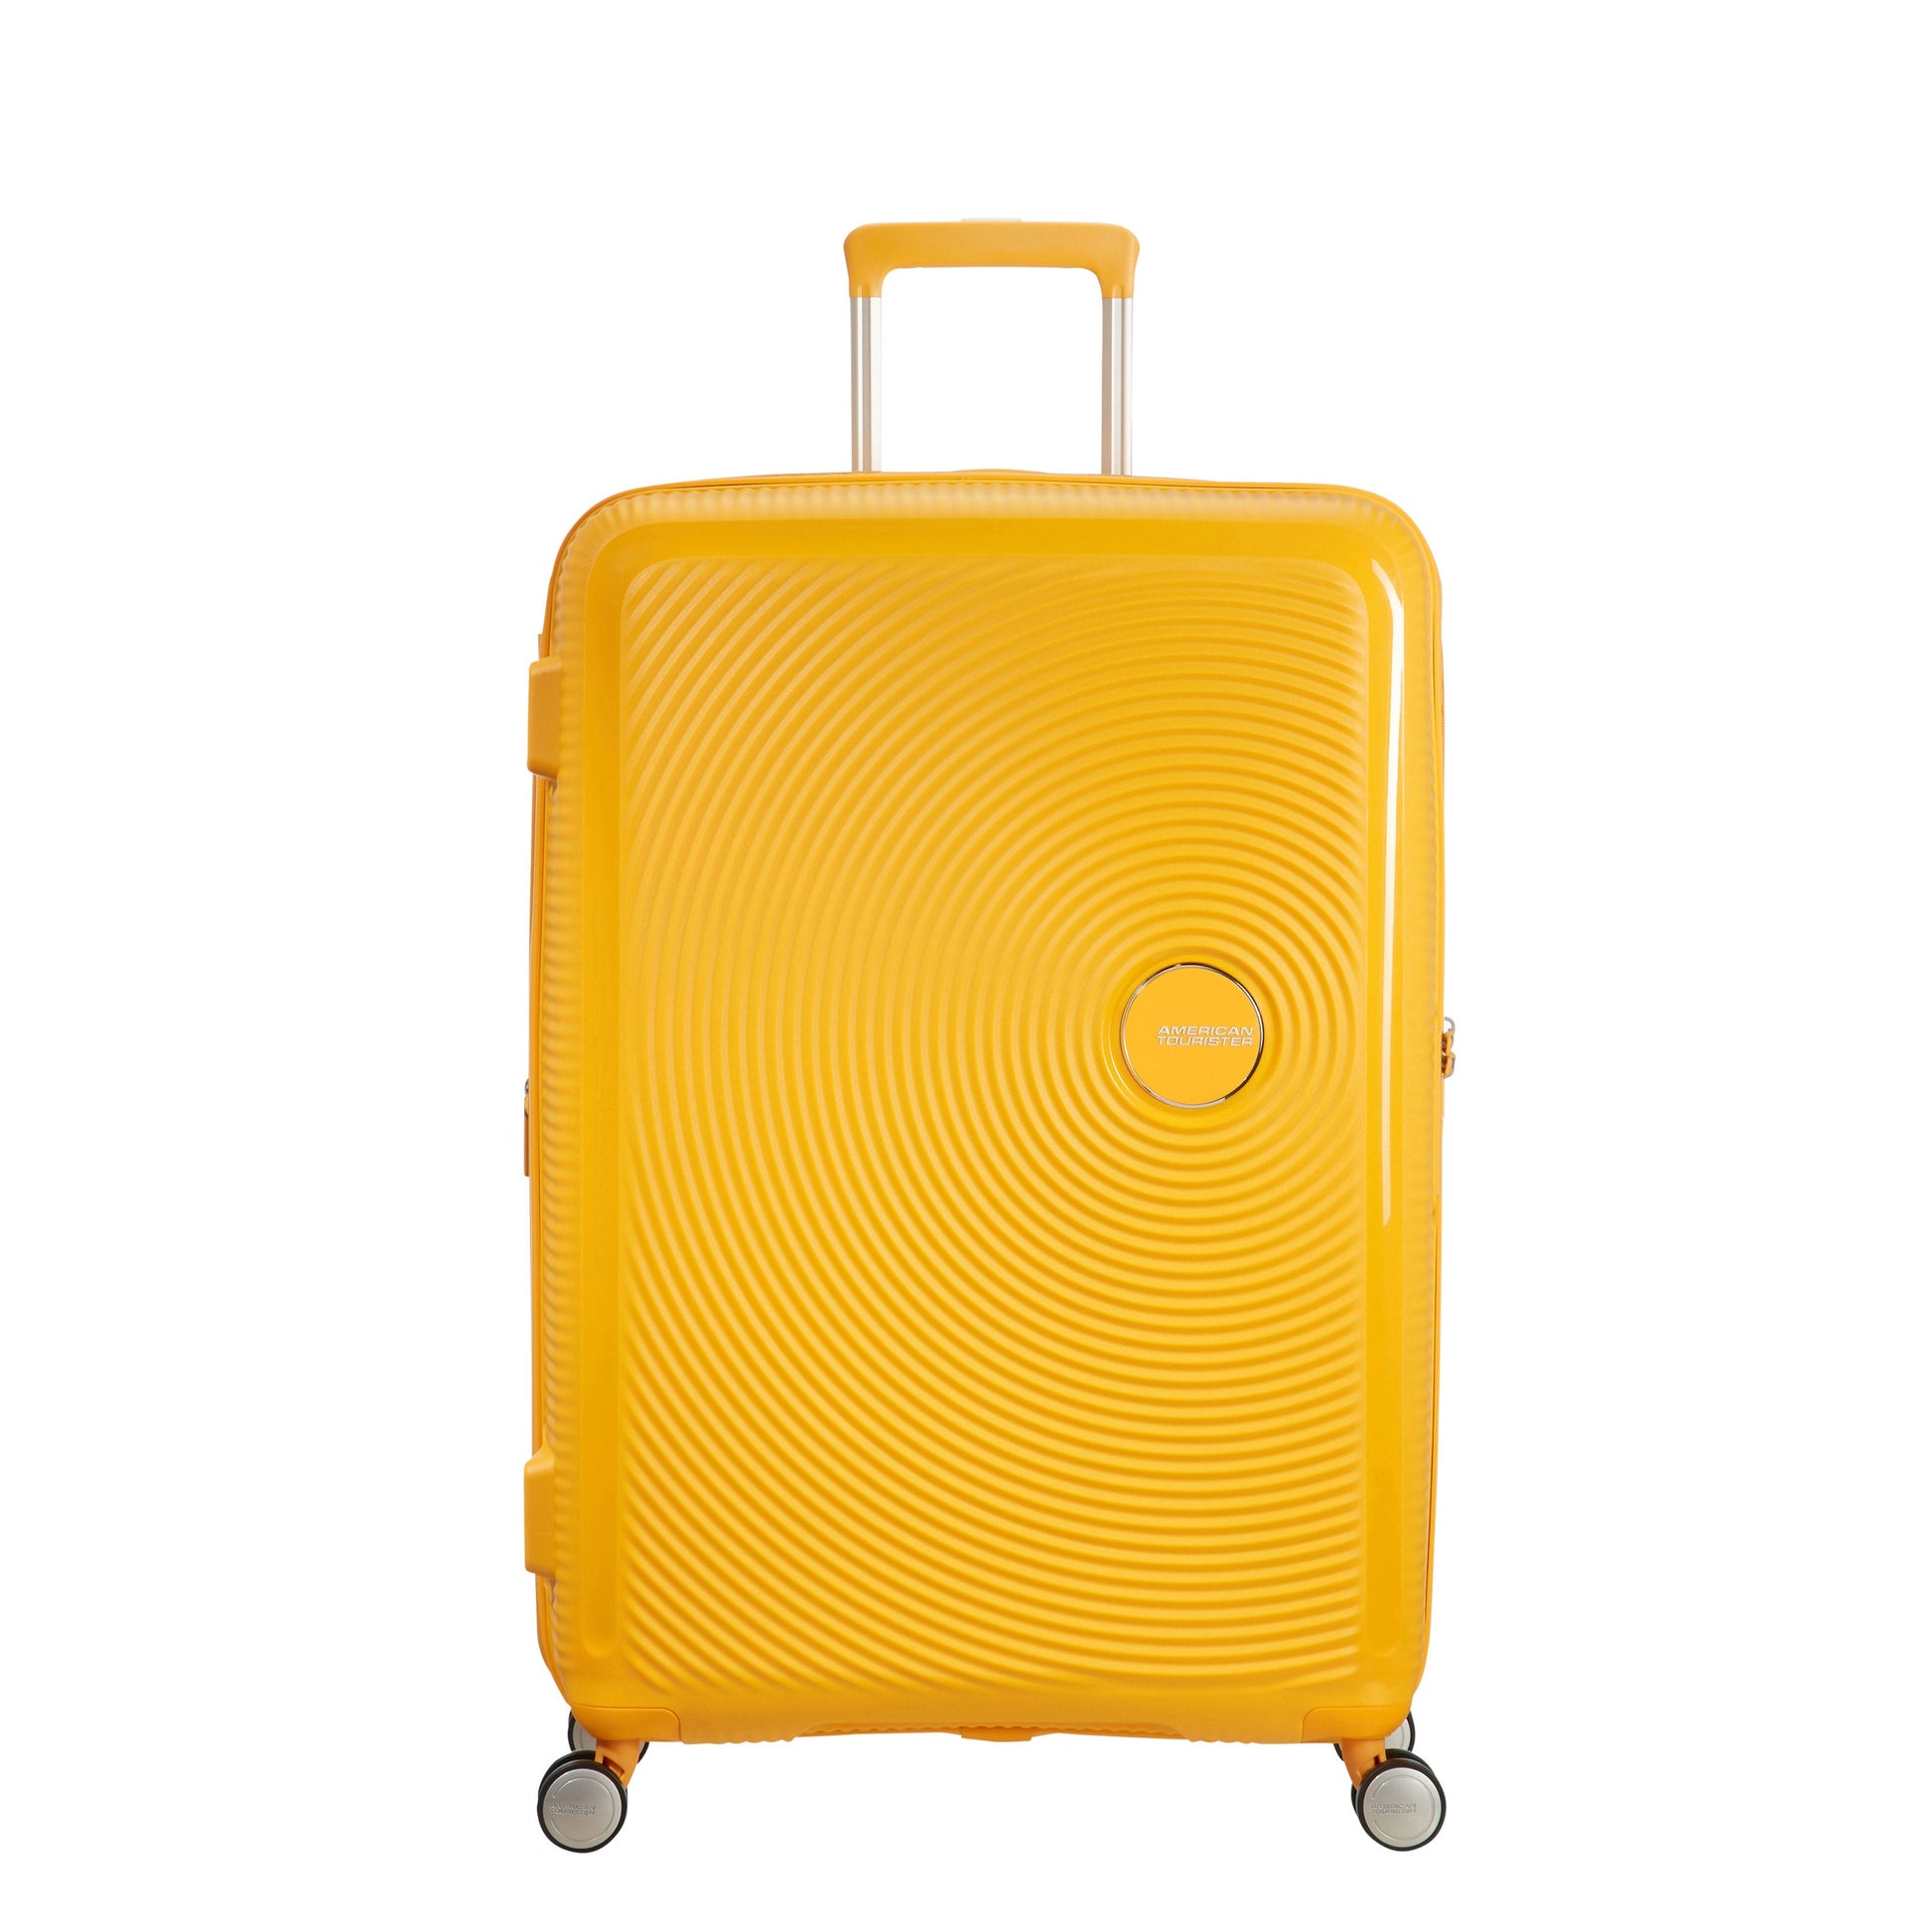 American Tourister Curio Spinner Large Expandable Luggage - Golden Yellow